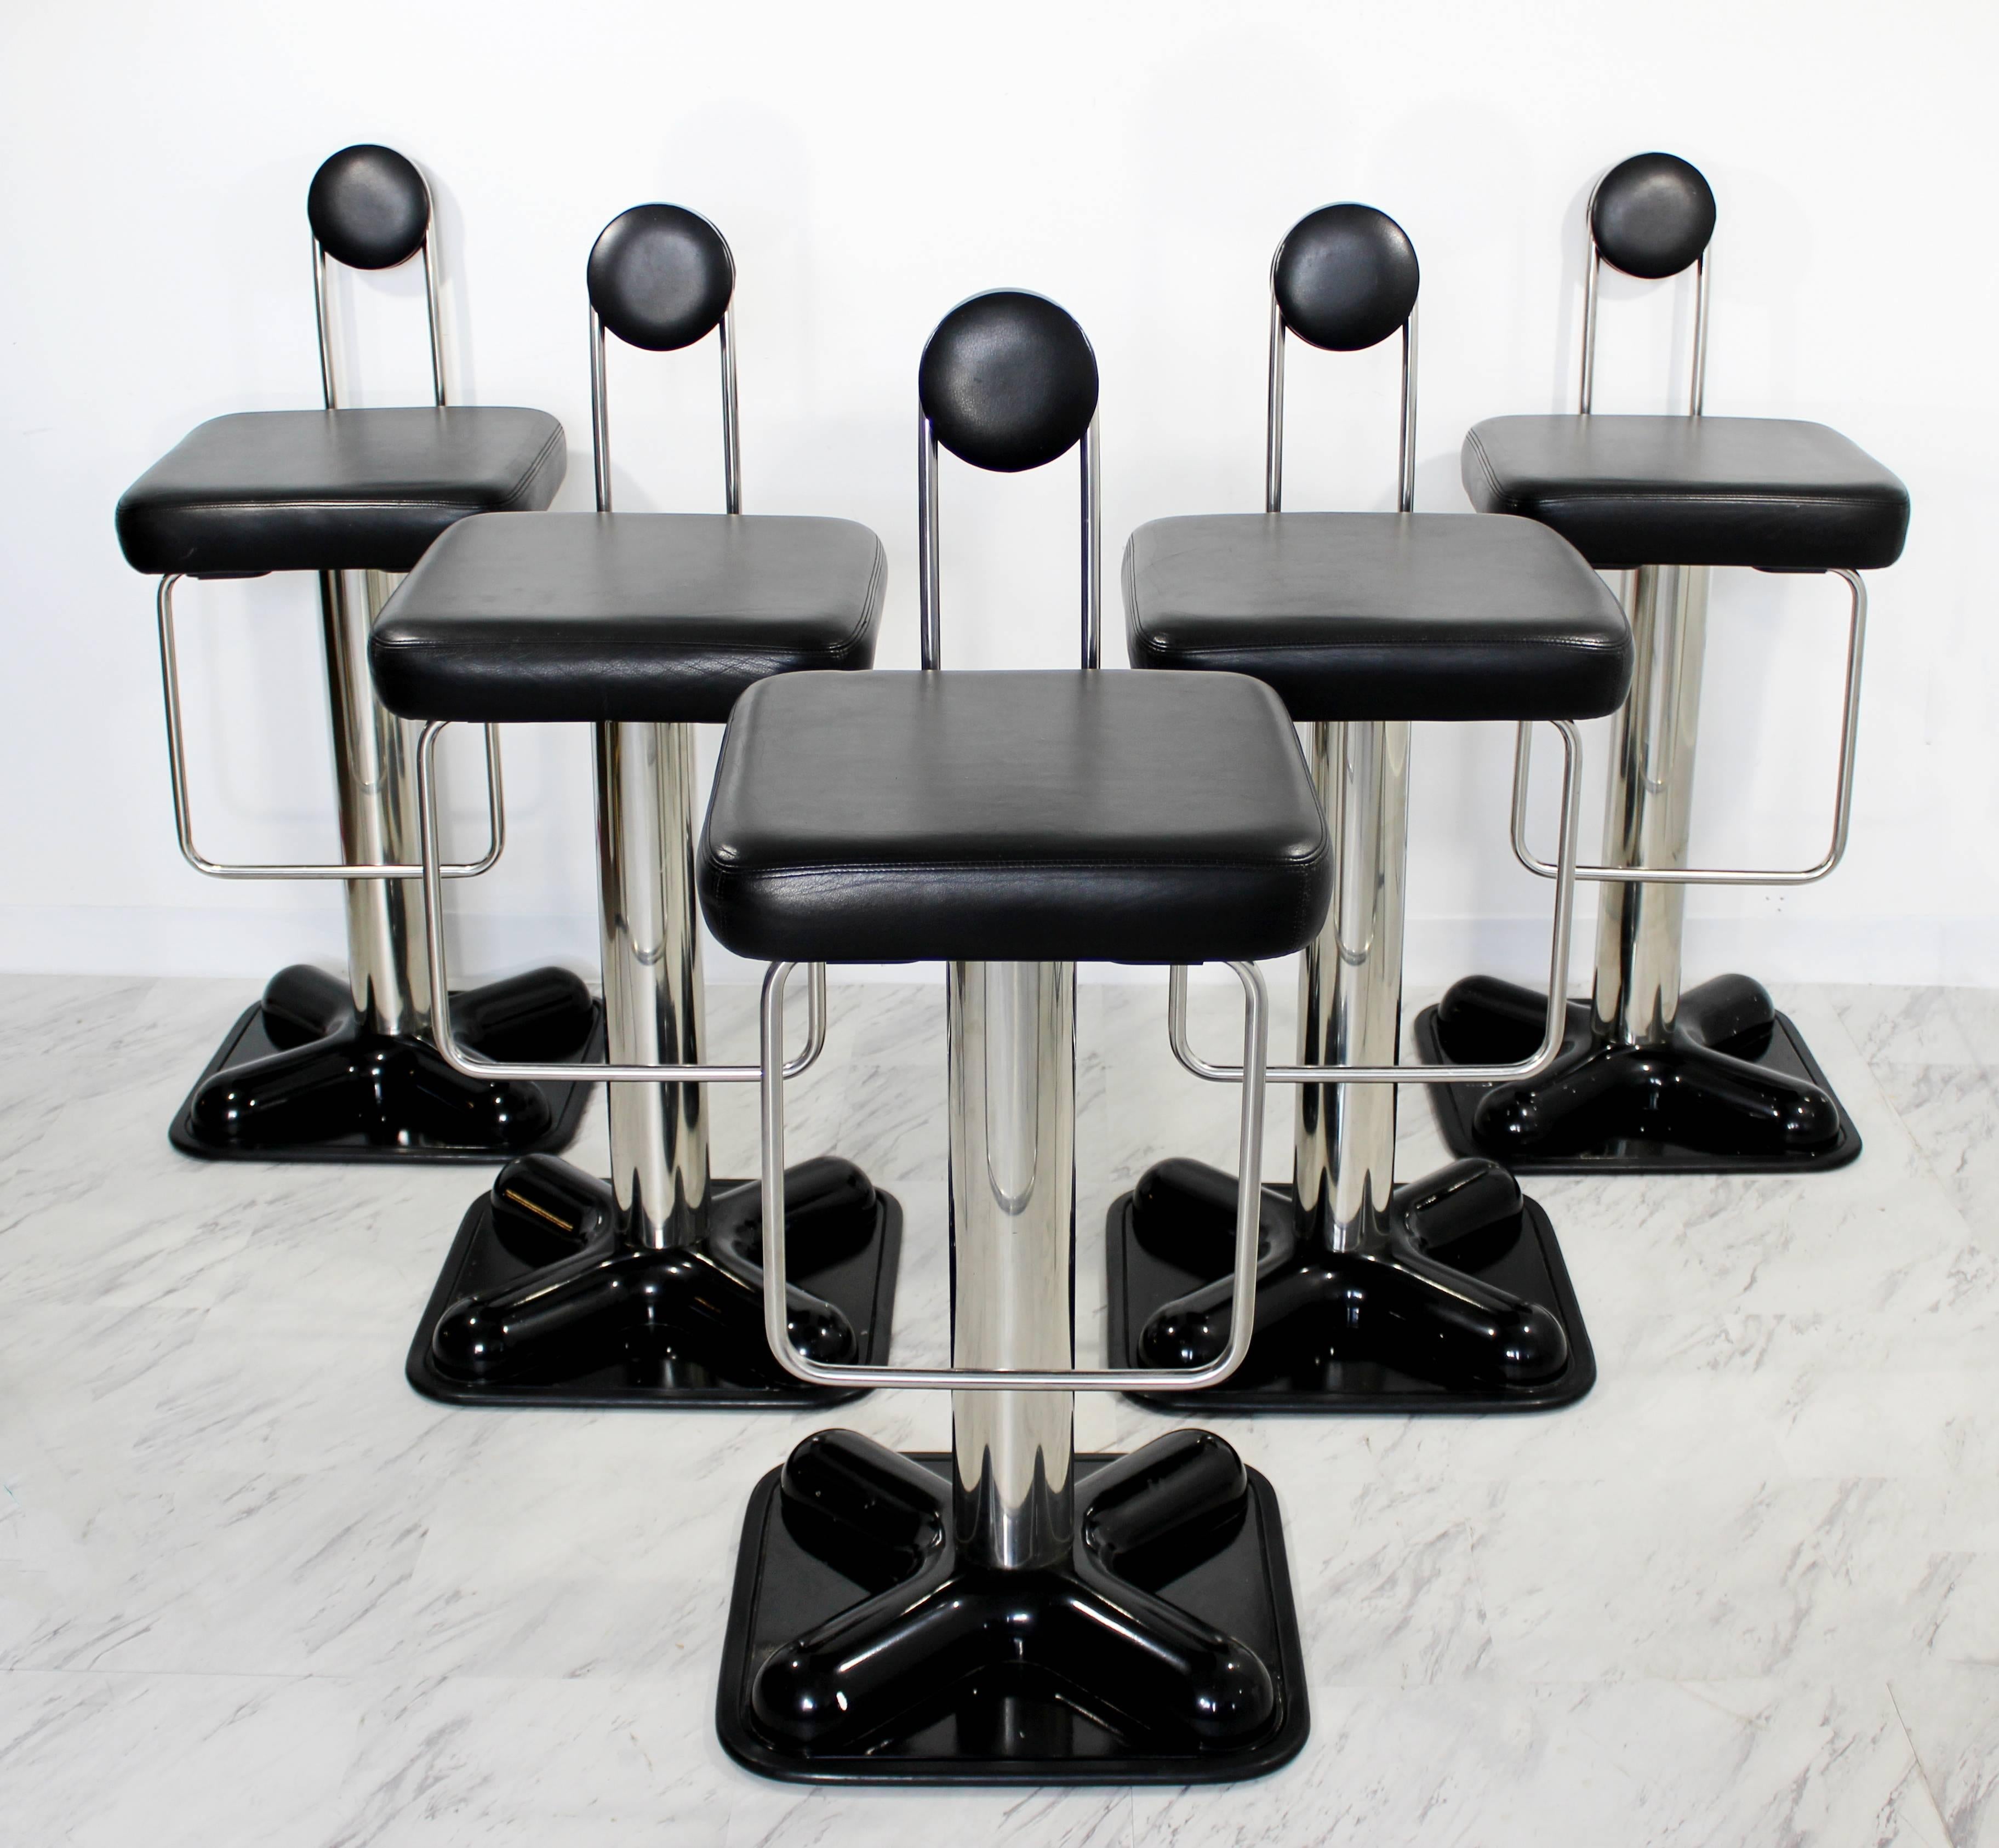 For your consideration is a set of five, incredible bar stools, Birillo model, designed by Joe Colombo for the Italian company Zanotta, in the early 1970s. Pivotable black leather seats sit on chrome stems and black lacquered, plastic bases. Stamped